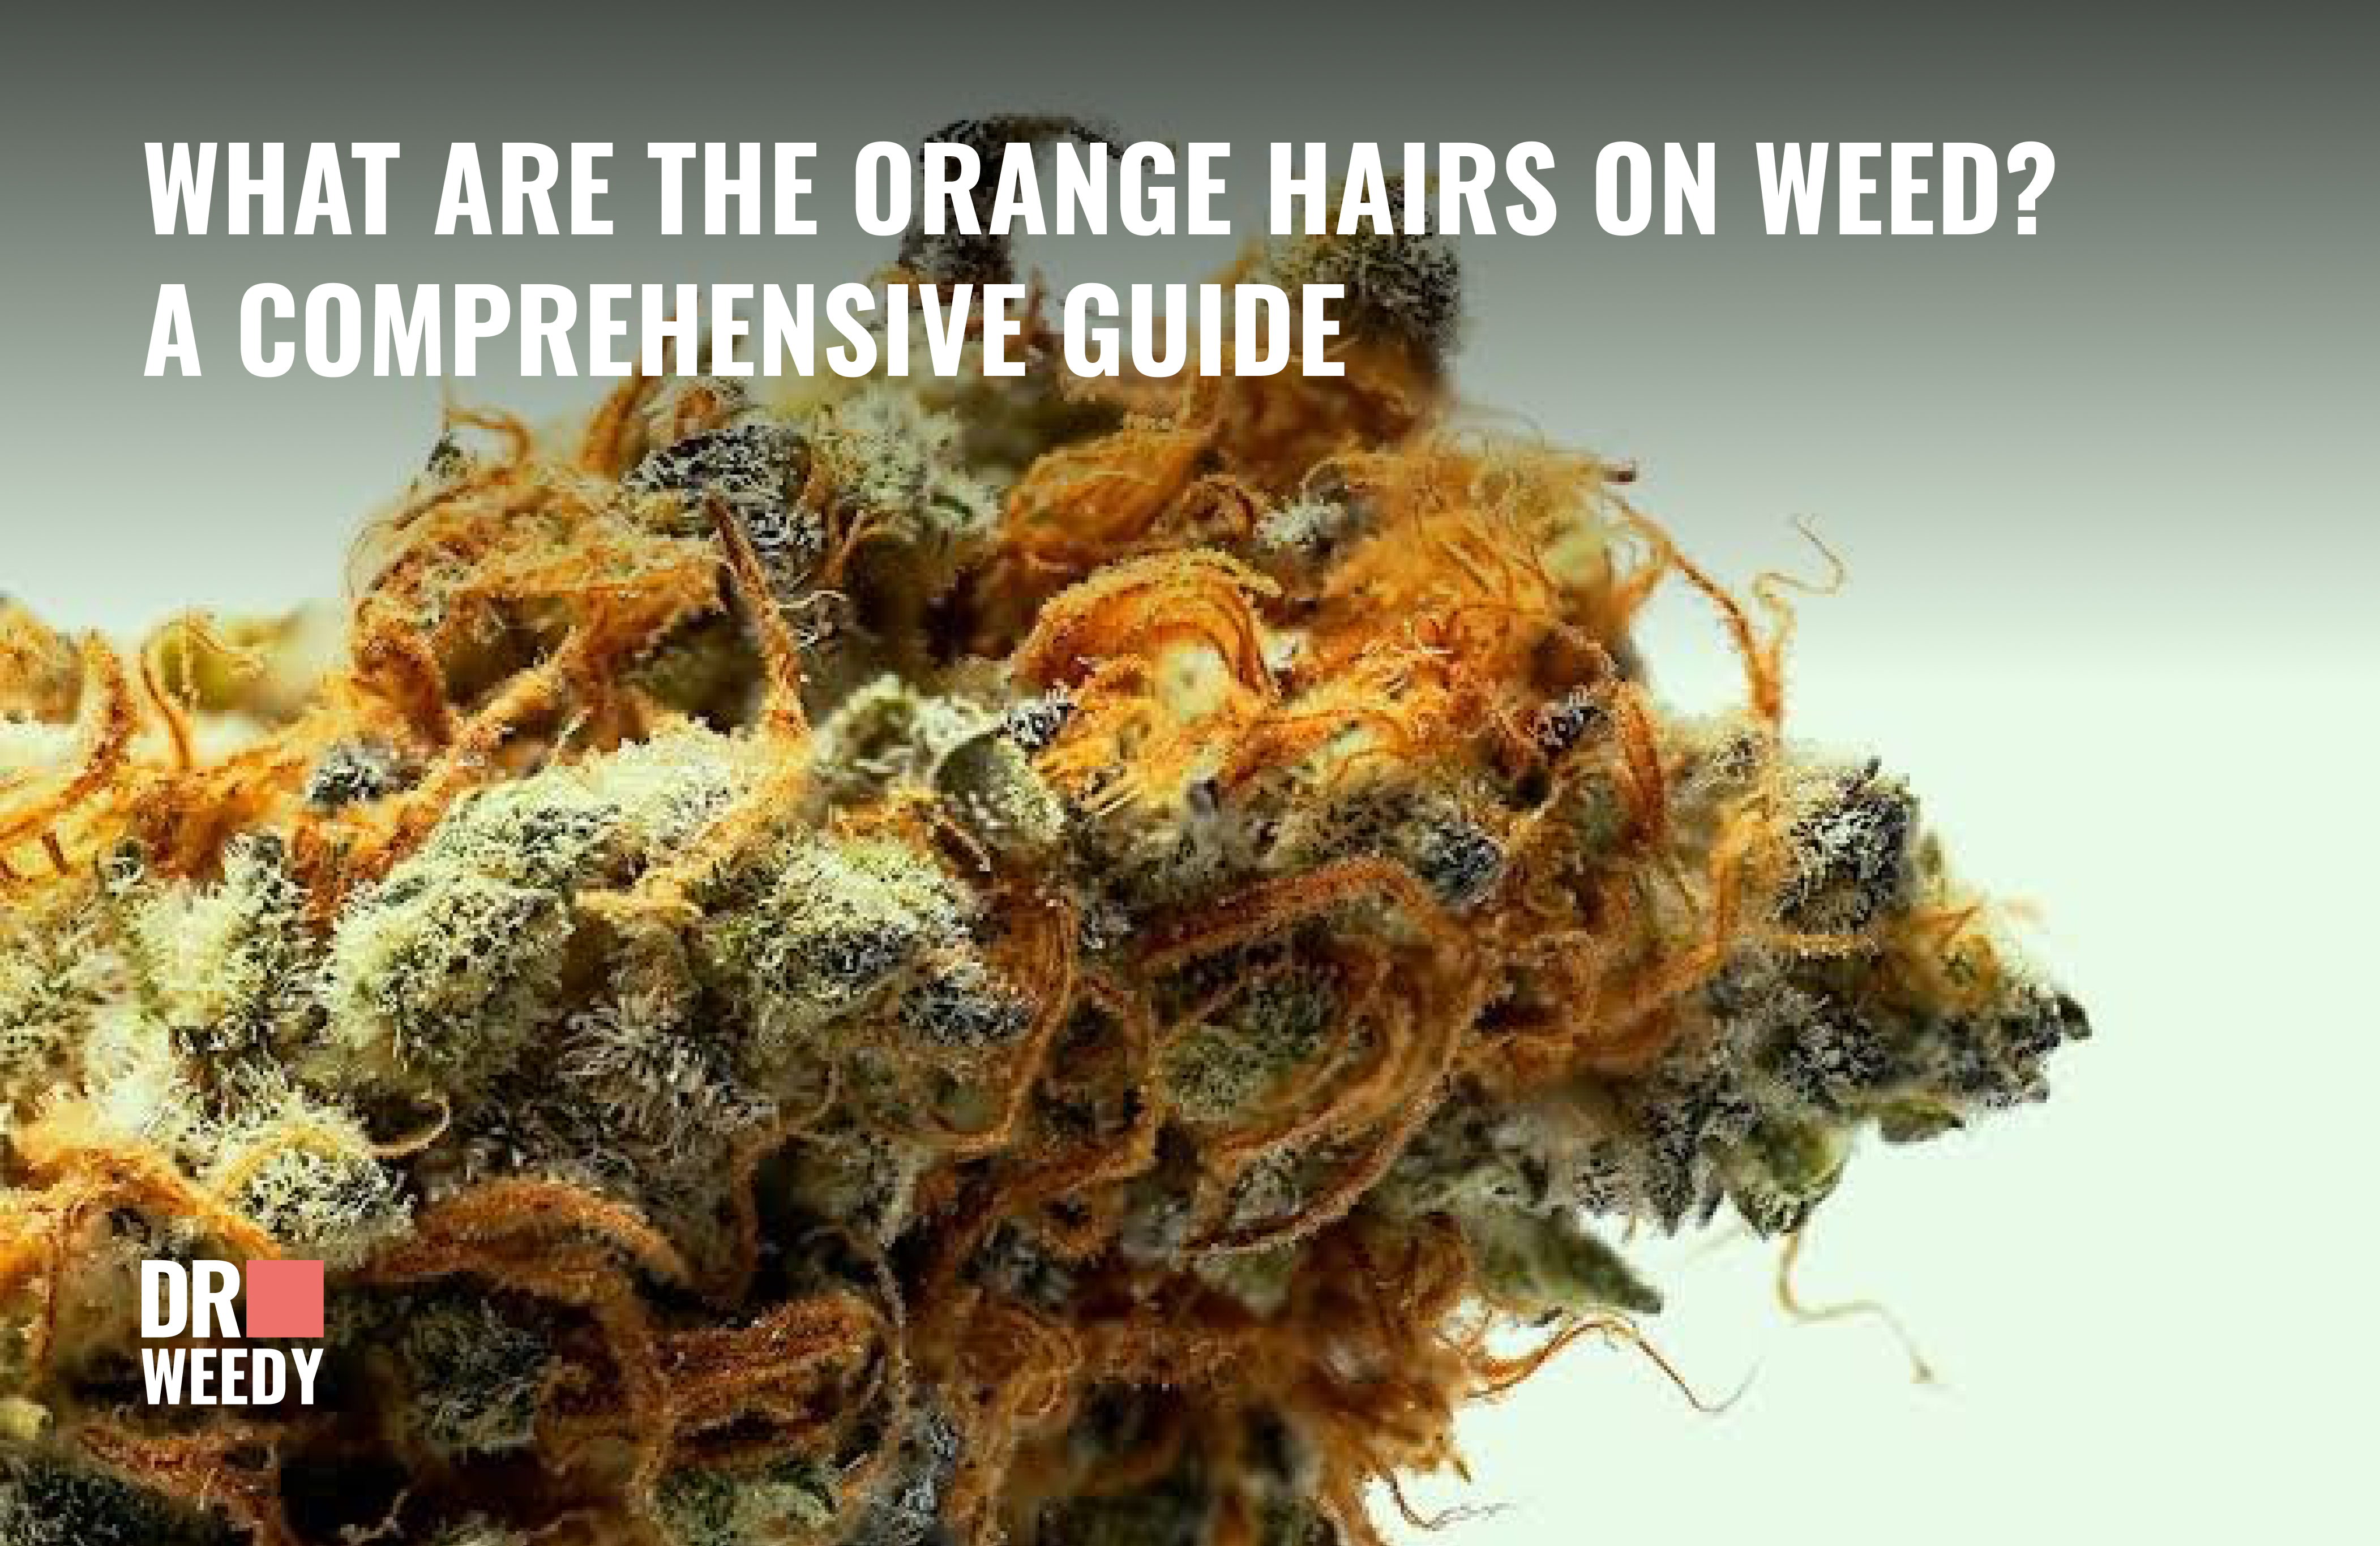 What Are the Orange Hairs on Weed? A Comprehensive Guide